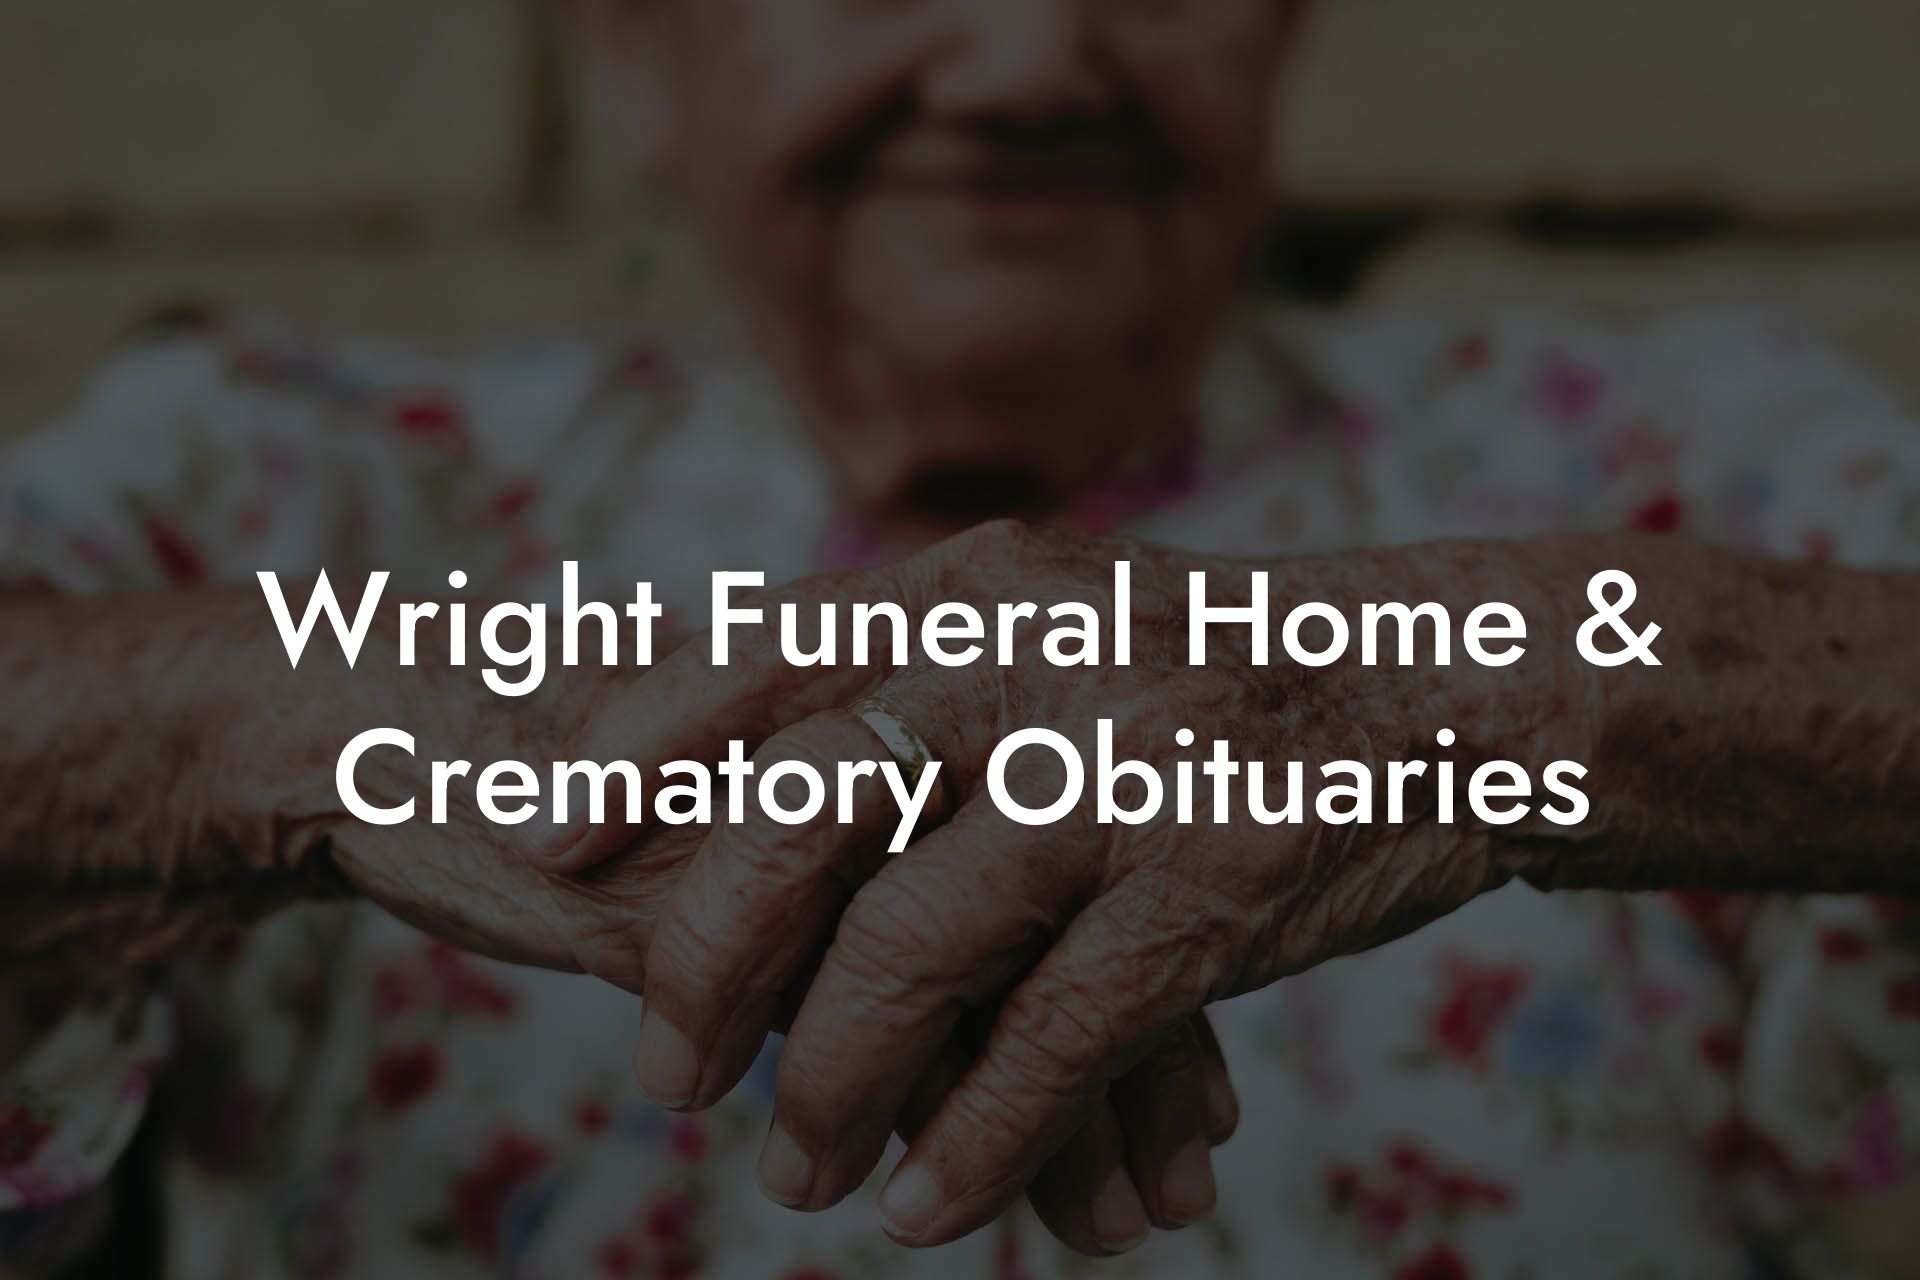 Wright Funeral Home & Crematory Obituaries